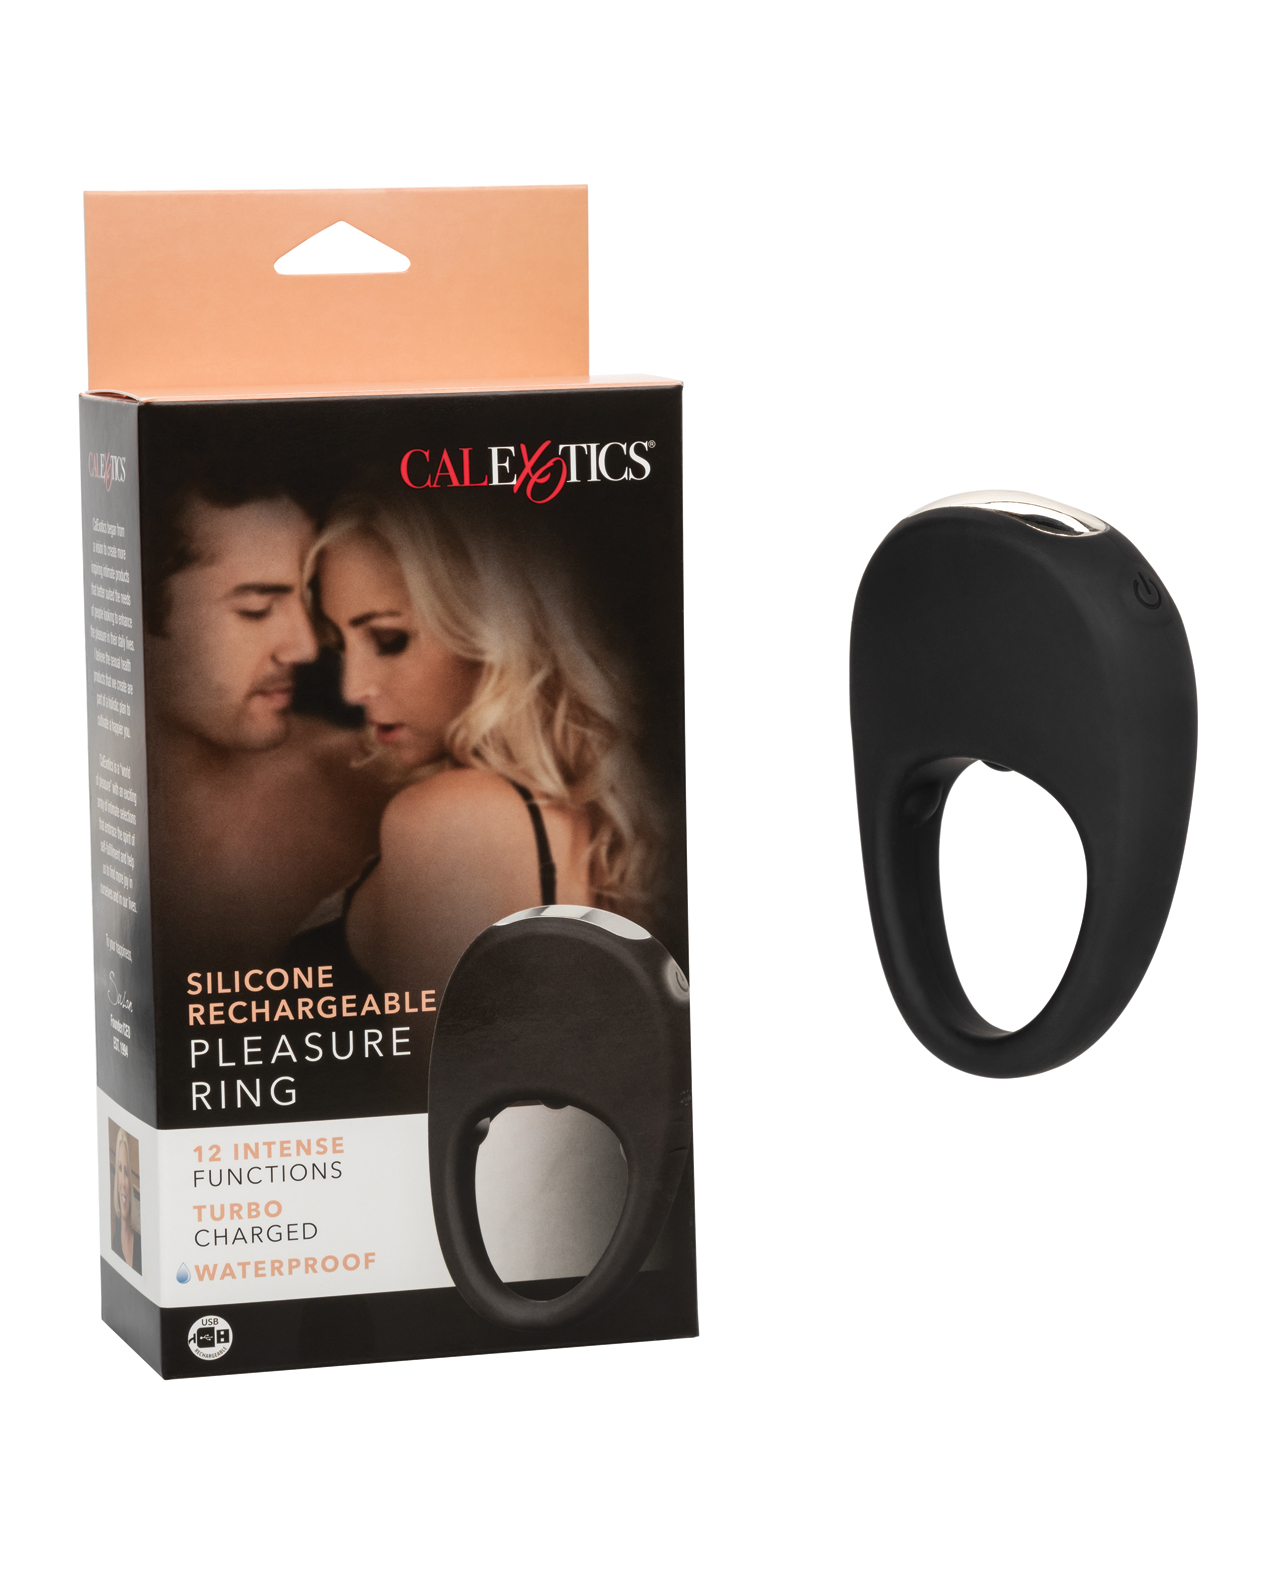 Black vibrating ring with a couple on a dark box